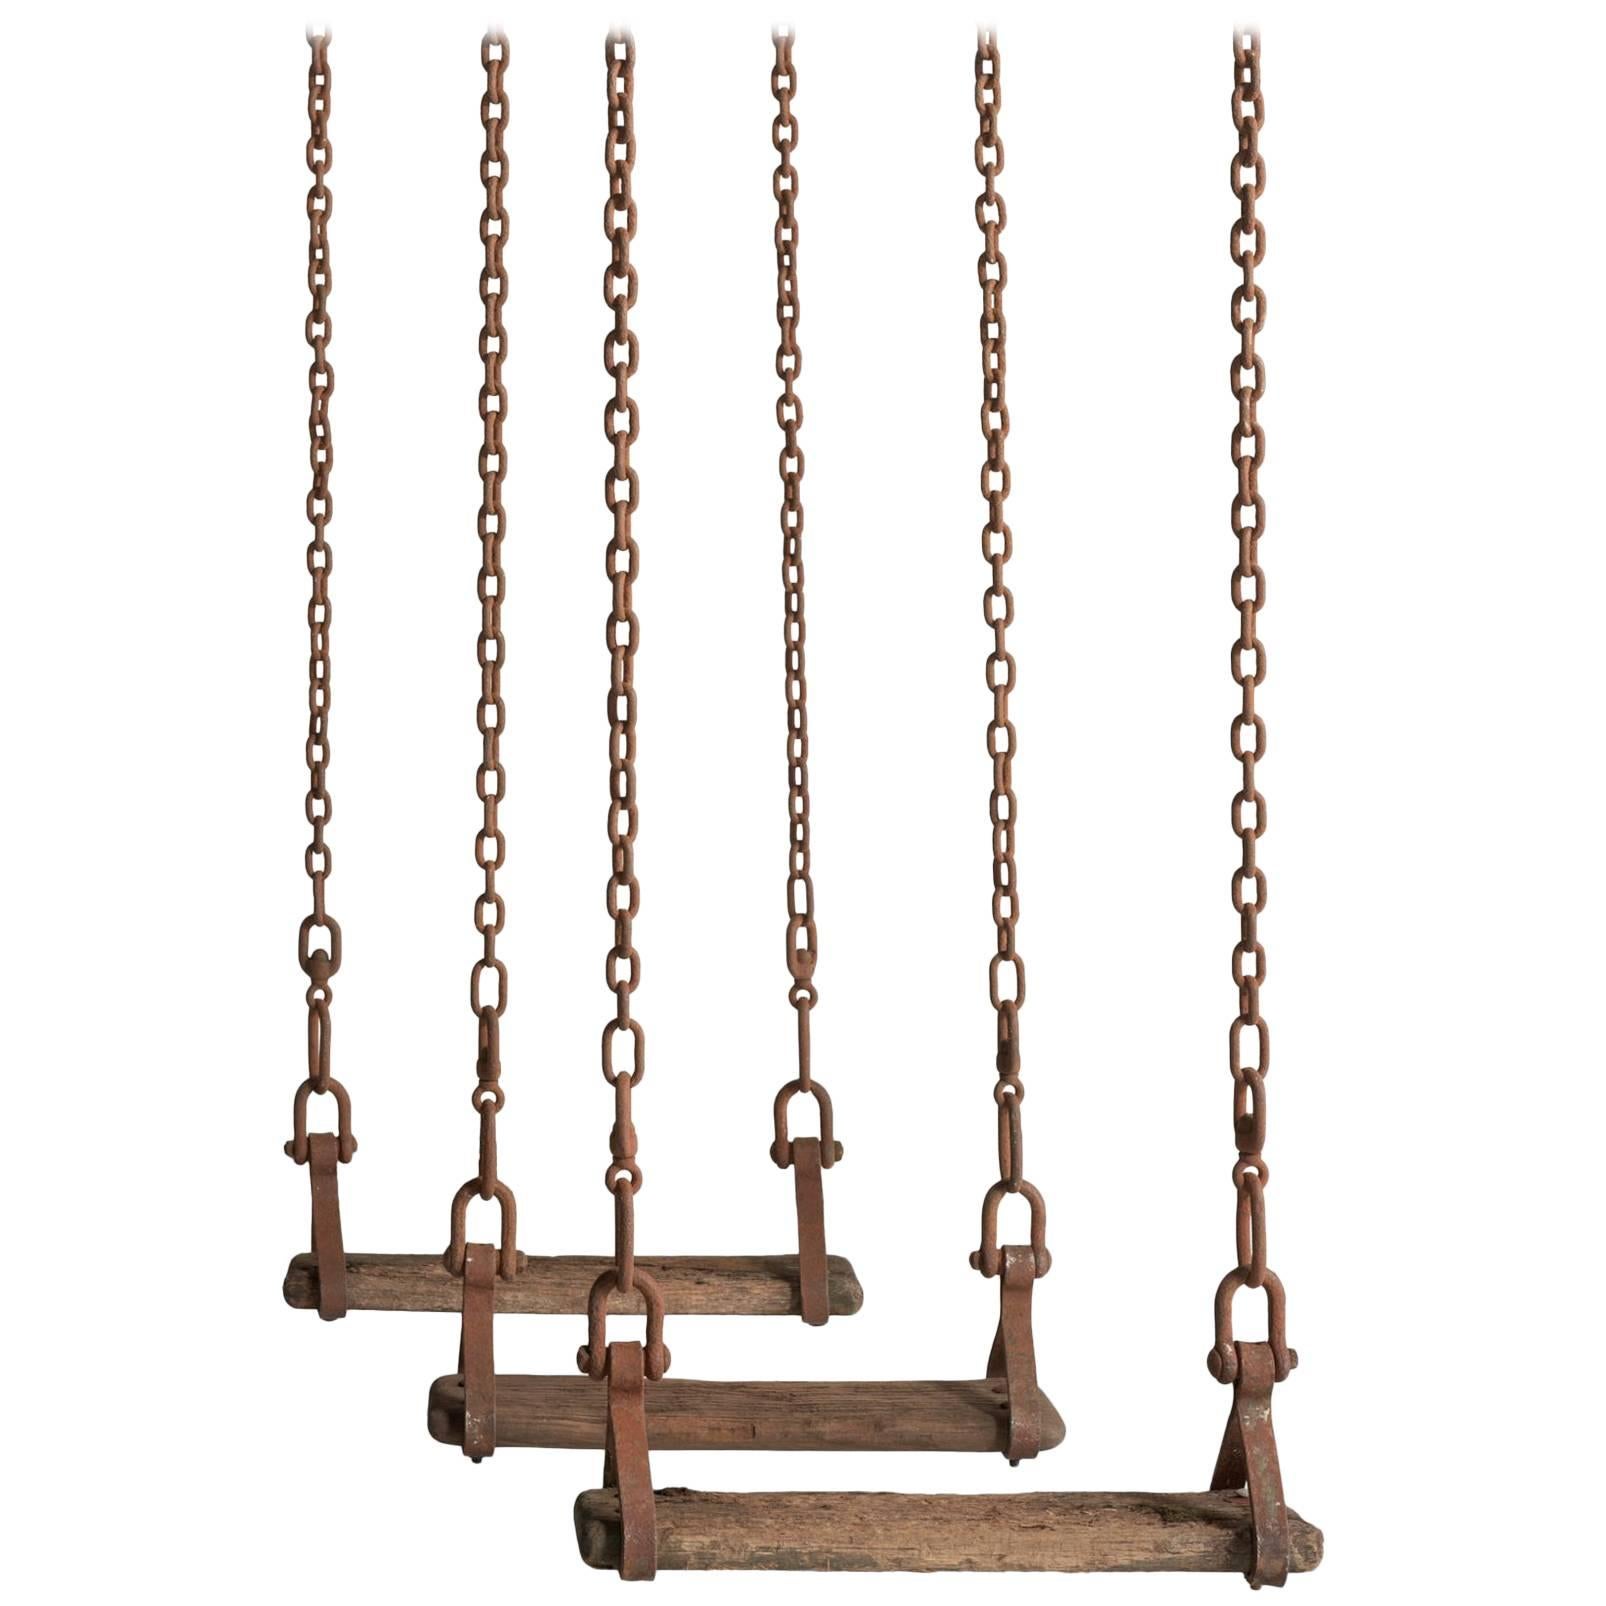 Victorian Swings, England, circa 1890.

Forged iron chain with timber seats.

(Two available).